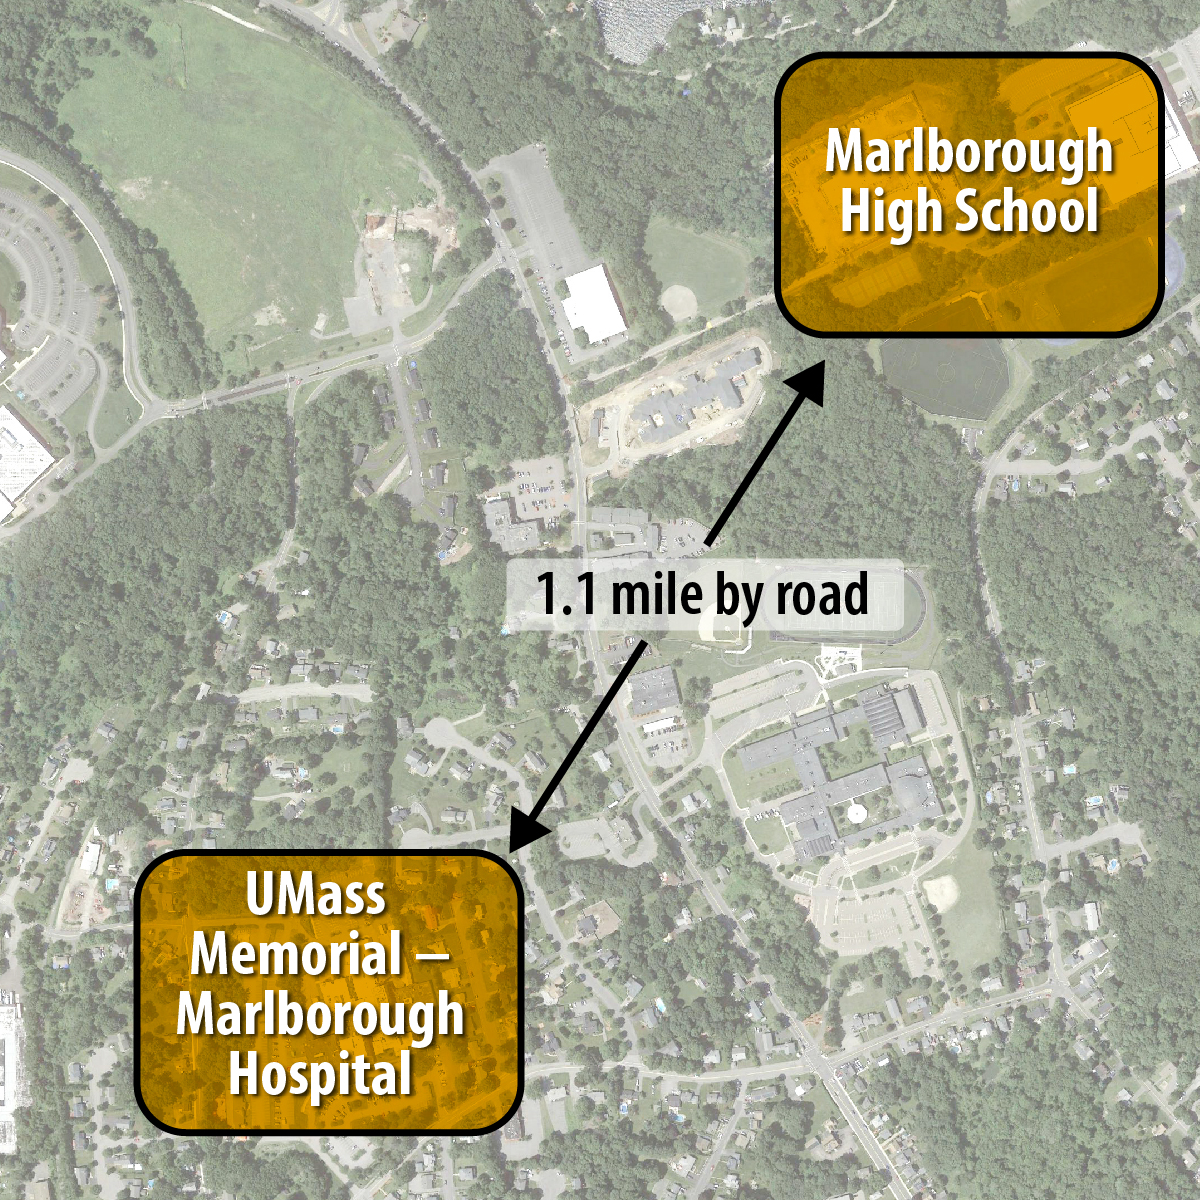 Map showing distance from hospital to high school